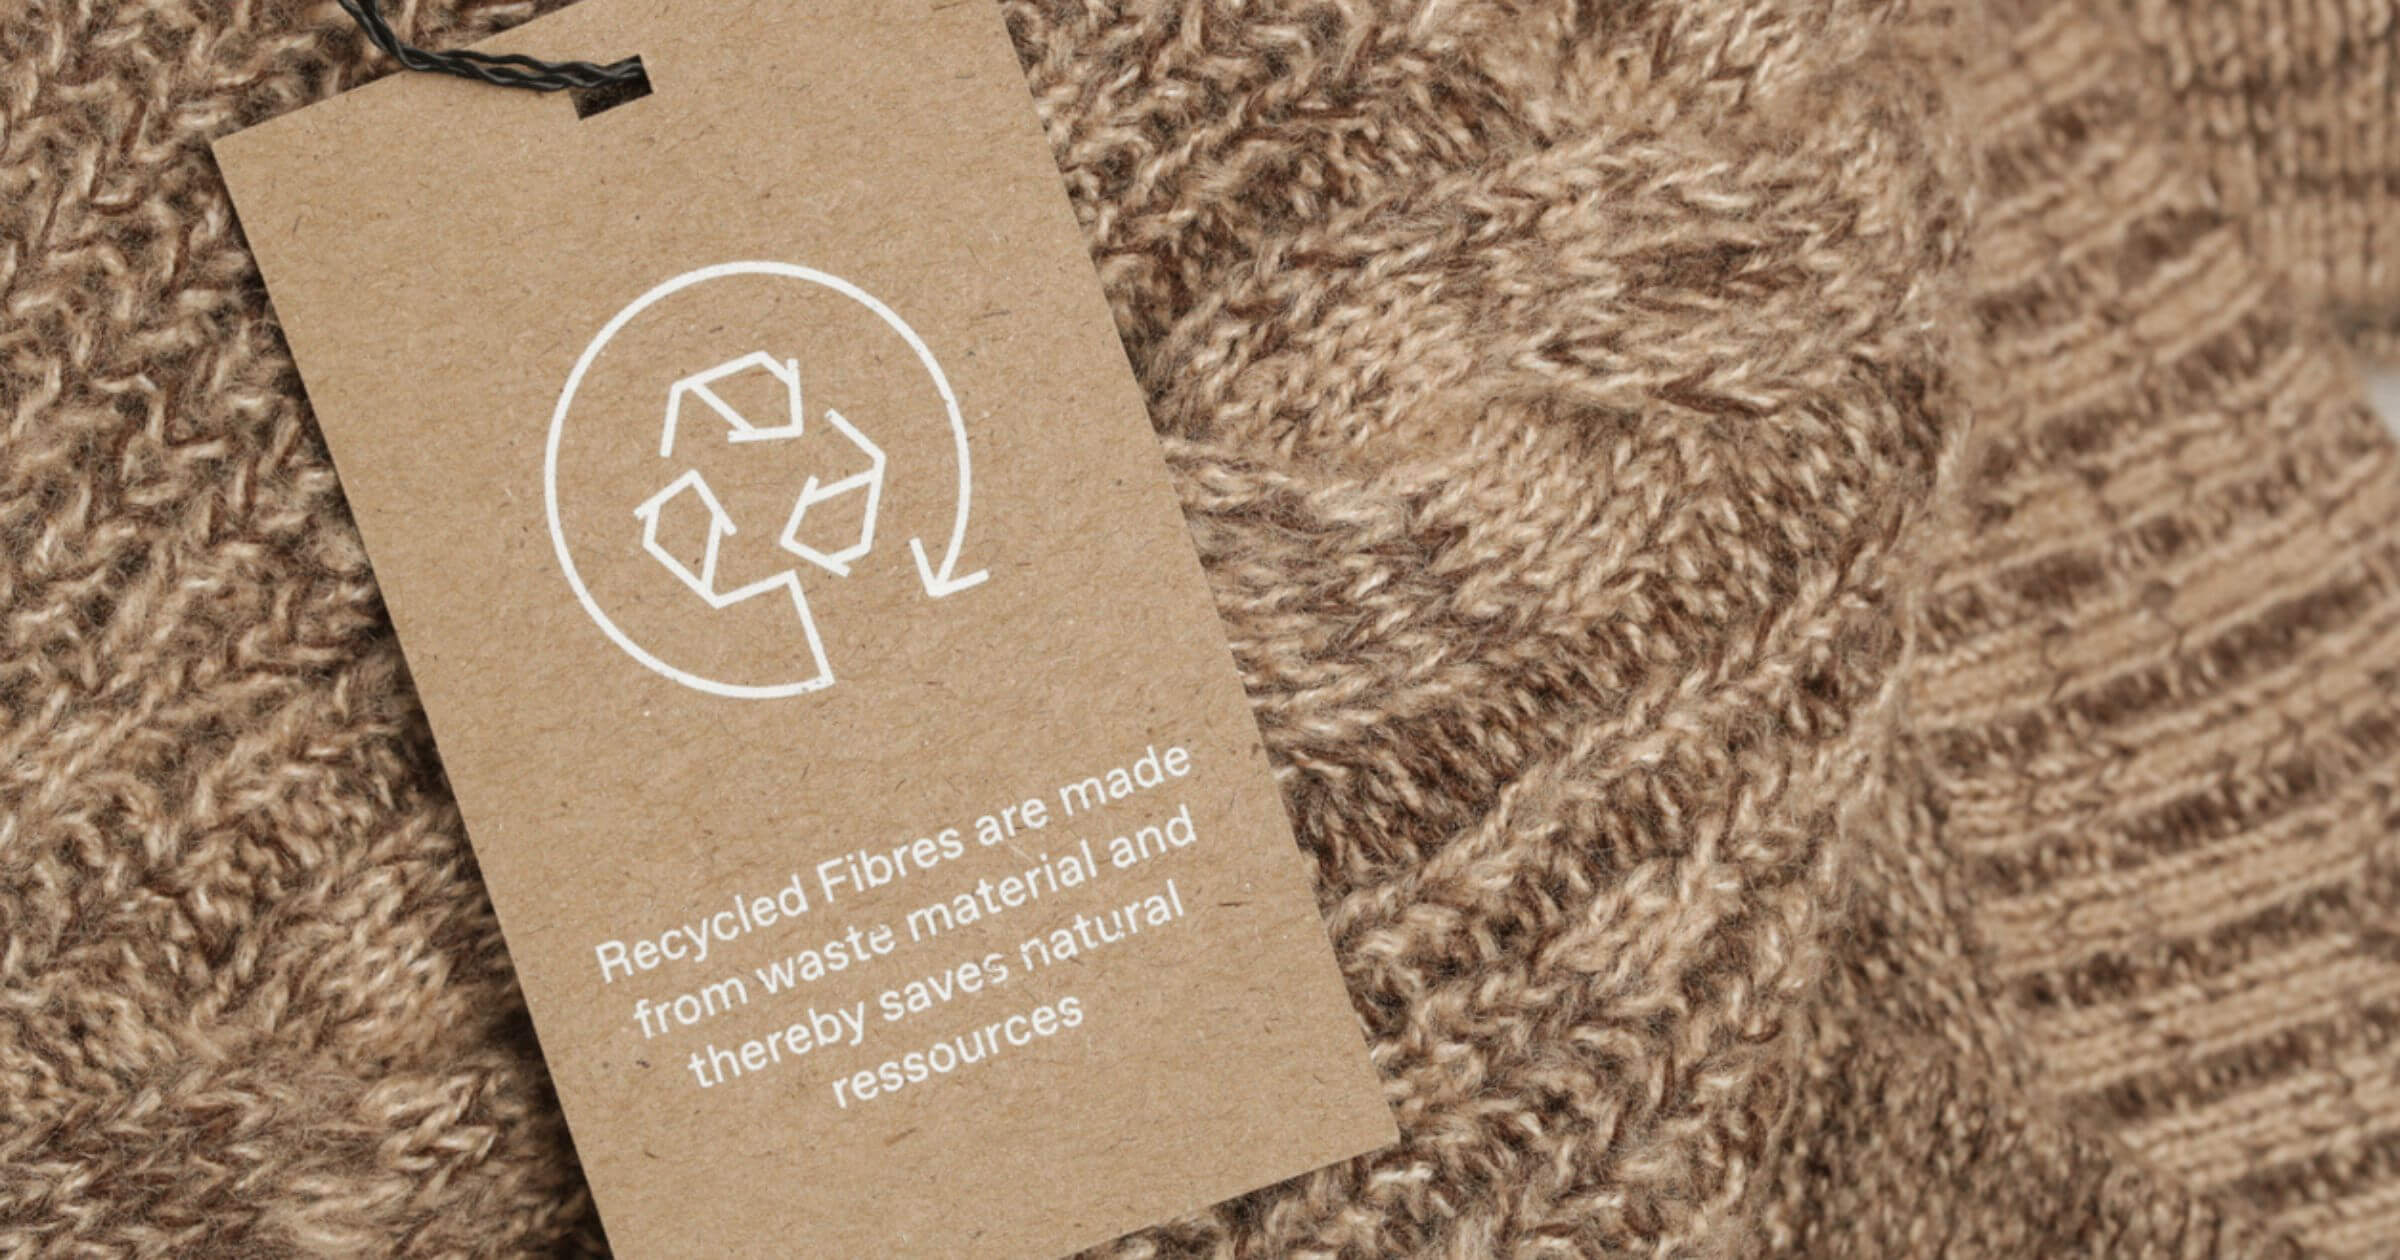 A close up of a clothes label focused on recycling the materials